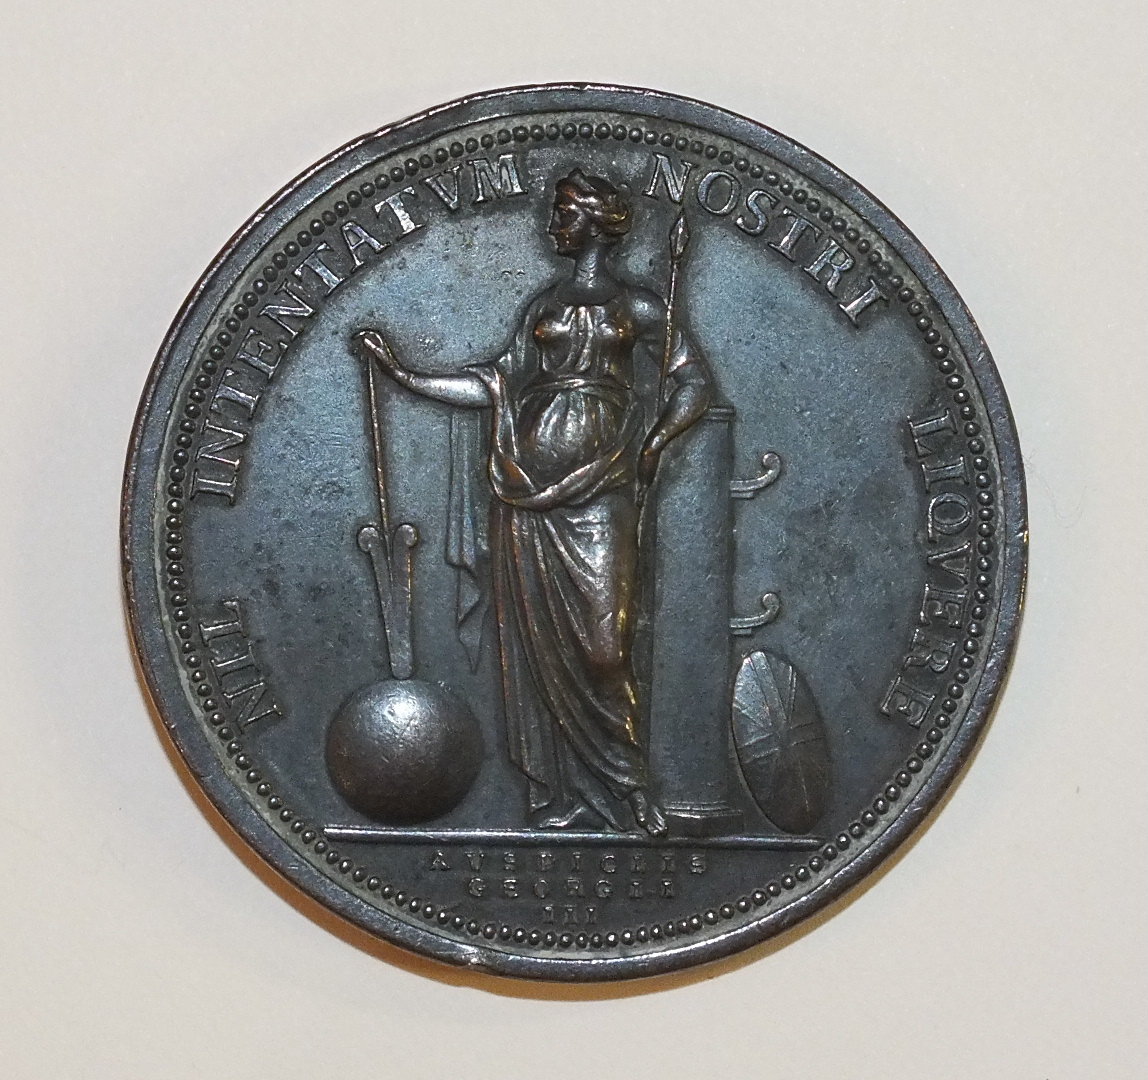 A bronzed copper 1784 James Cook Memorial Medal by Lewis Pingo for the Royal Society, showing a bust - Bild 2 aus 2